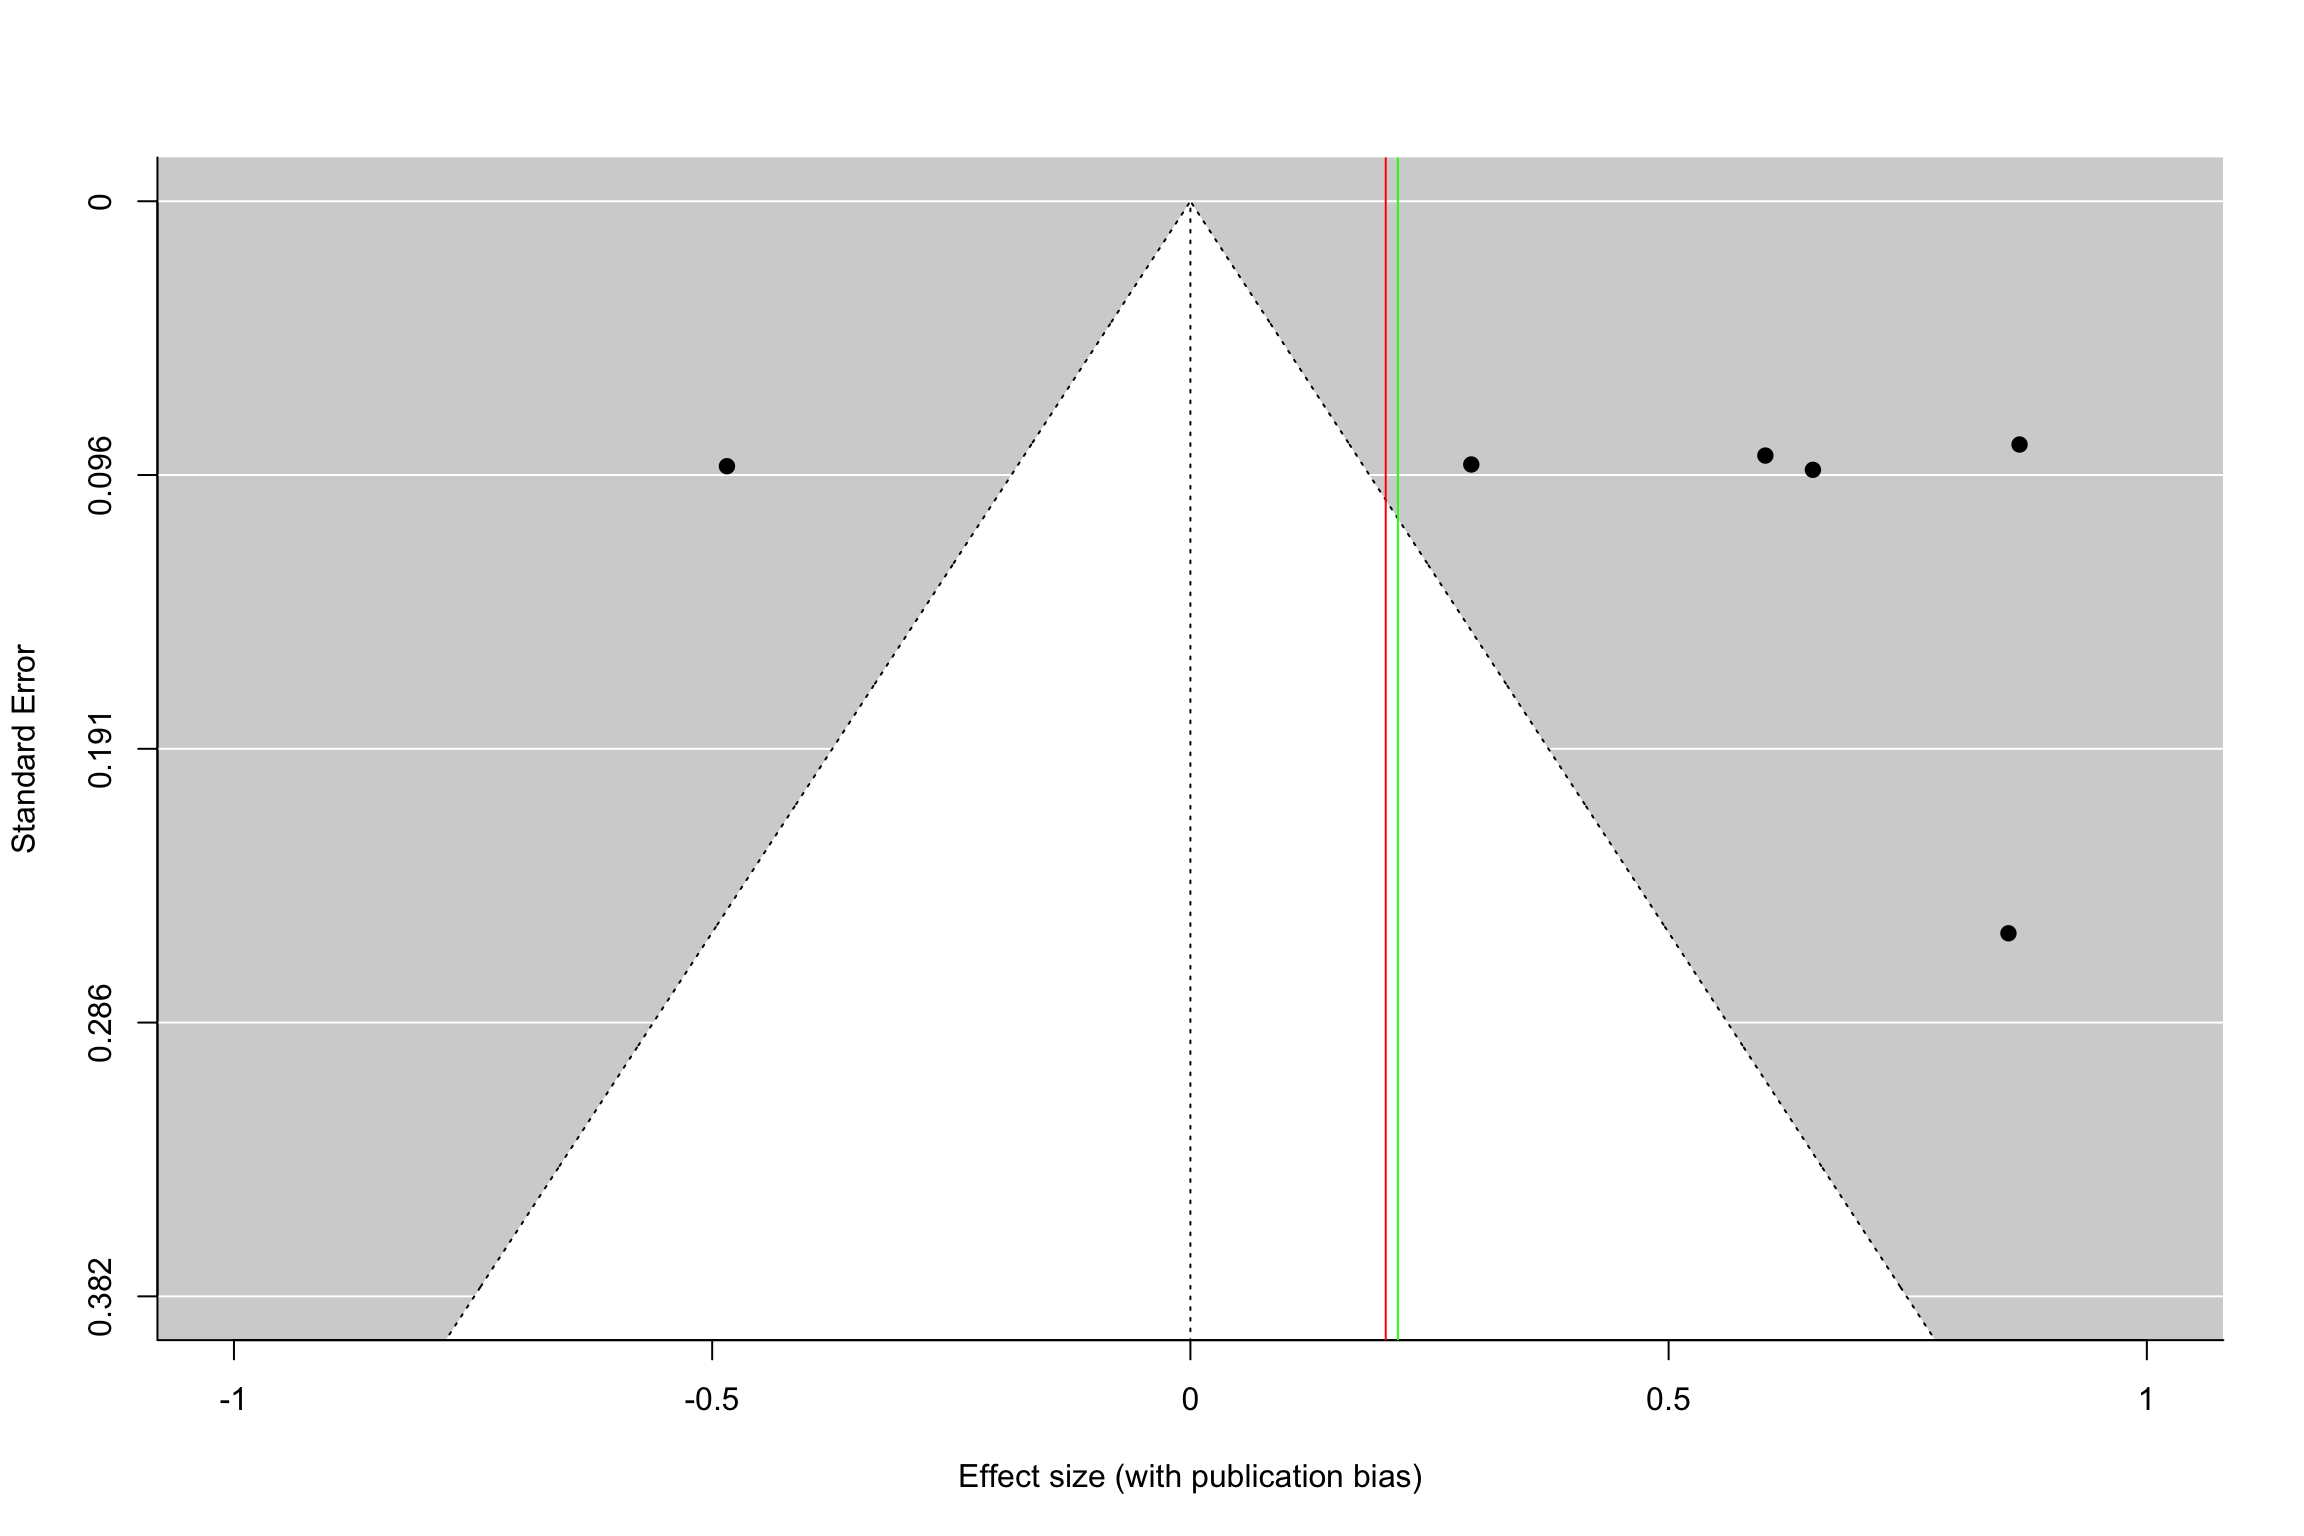 Funnel plot with and without publication bias (heterogeneous treatment effects, small and intermediate precision)